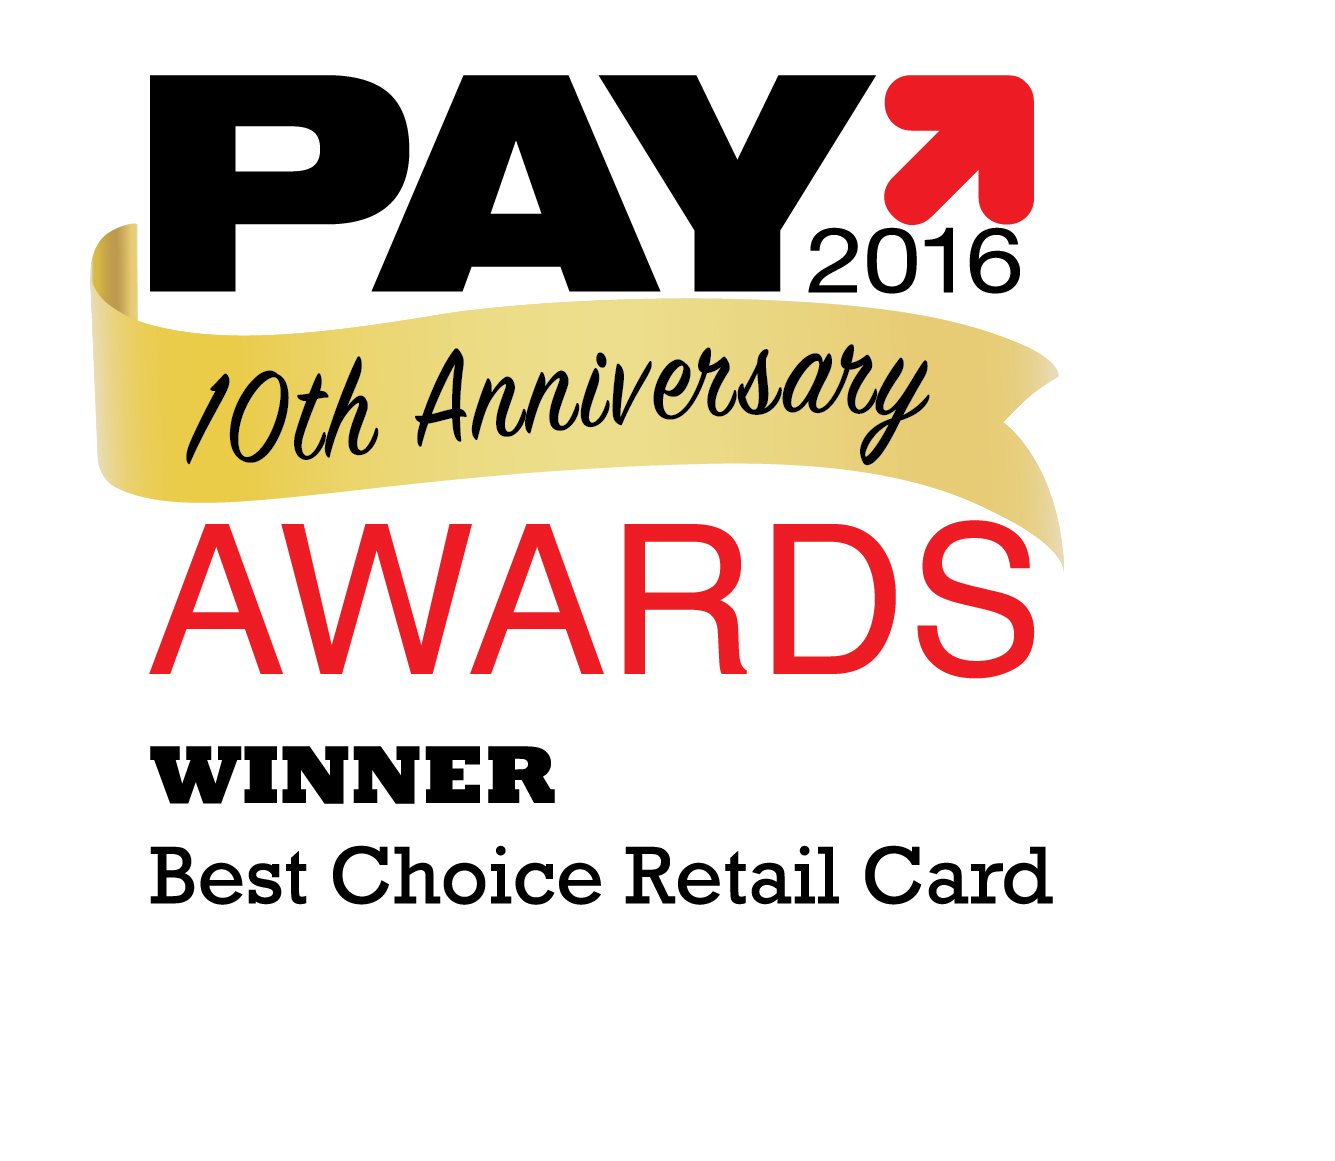 PayBefore Best Choice Retail Card Winner